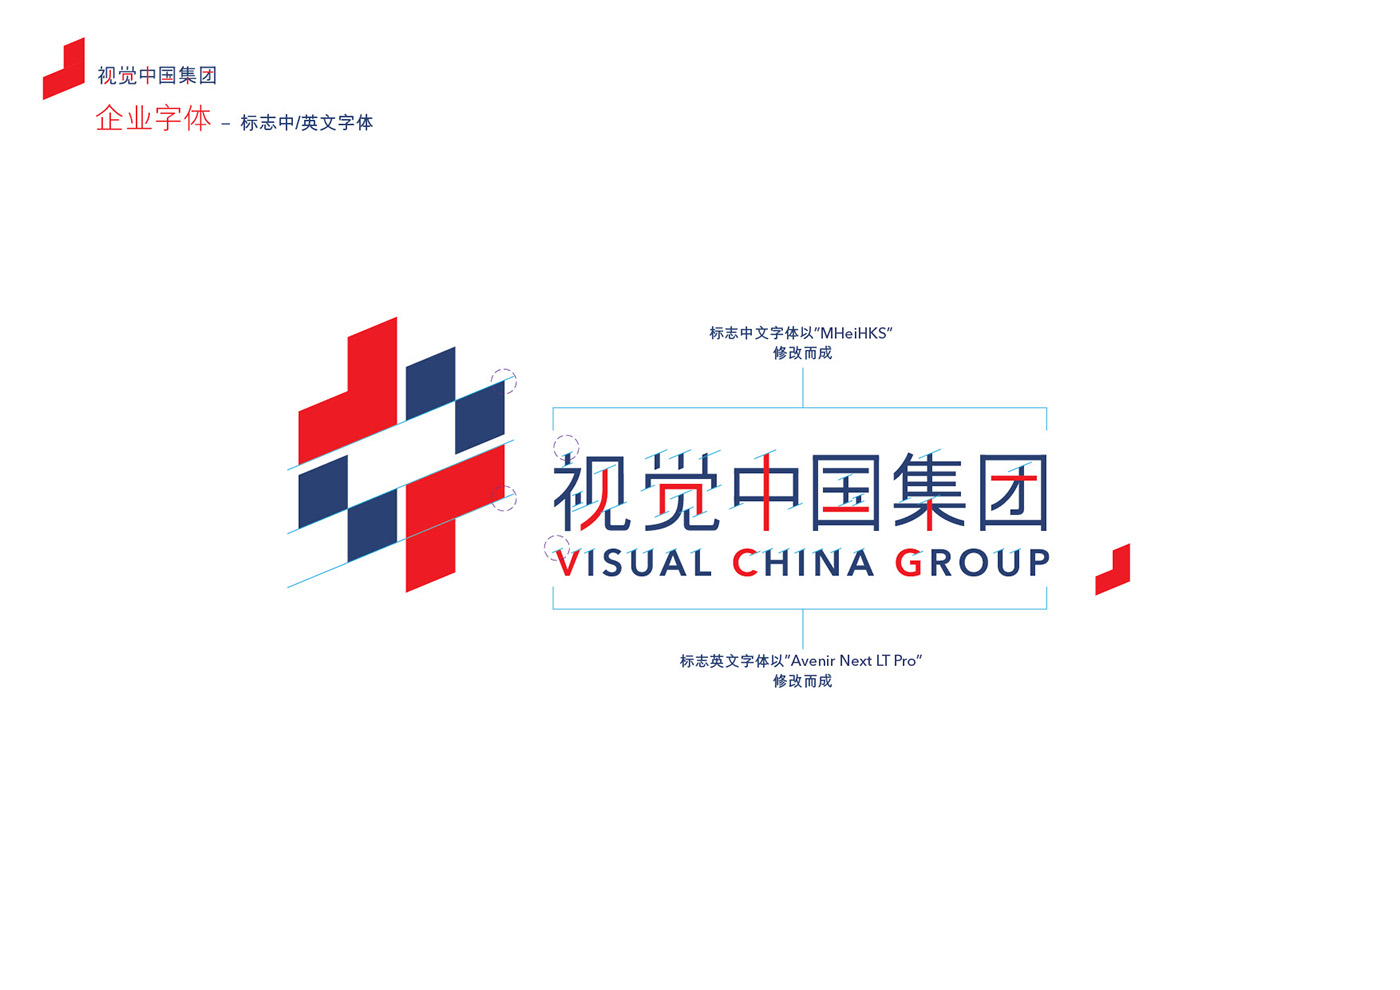 visual china group windows direction culture infinite door Linking